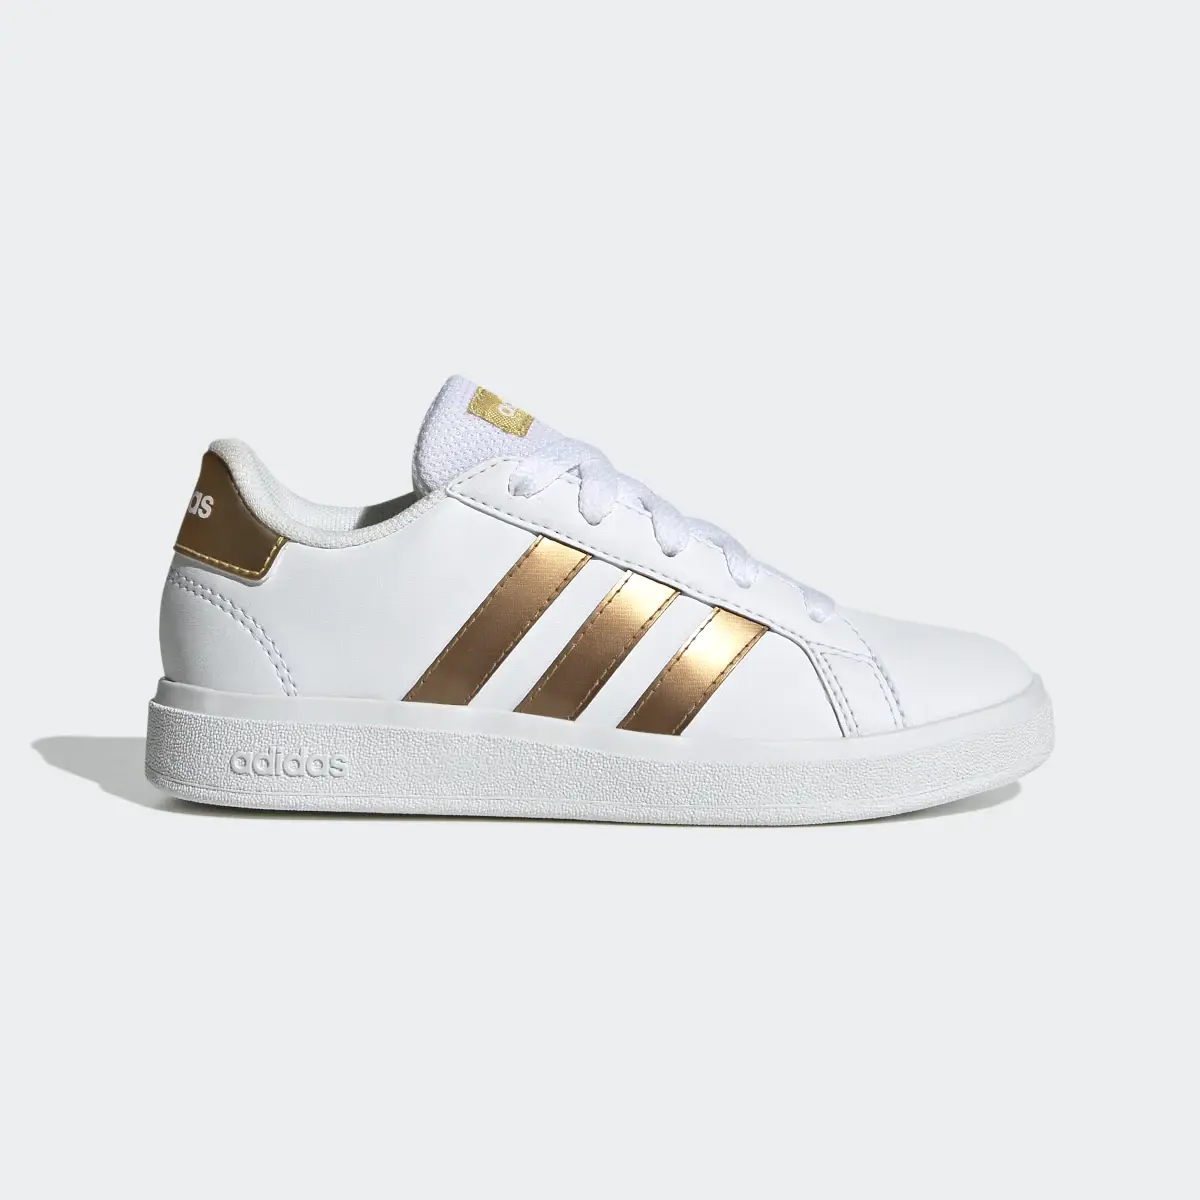 Adidas Grand Court Sustainable Lace Shoes. 2